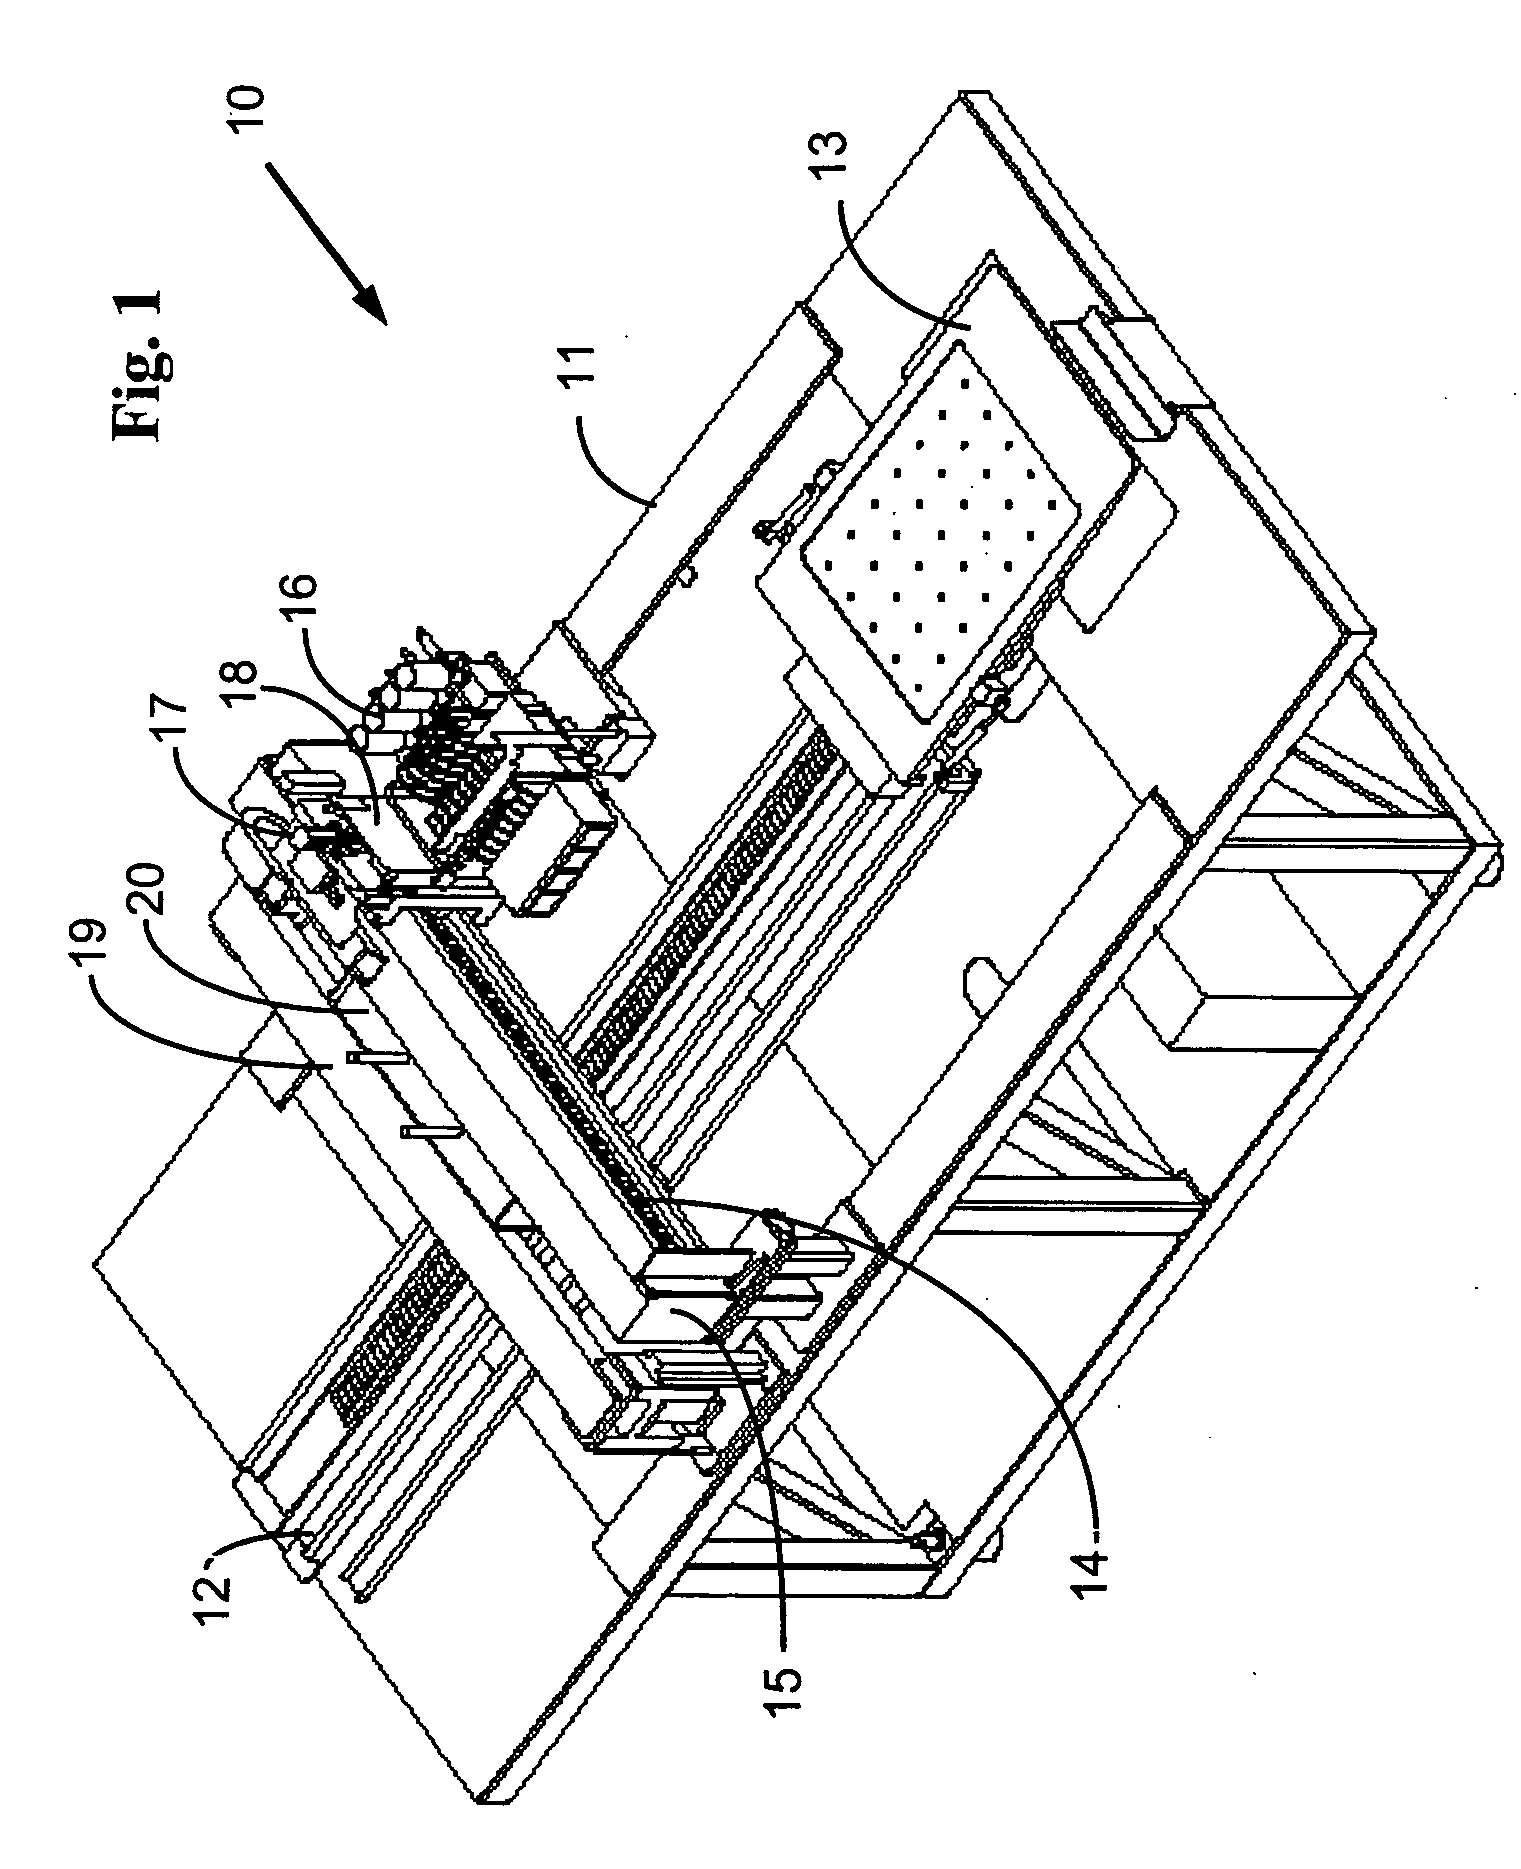 Process and system for printing images on absorptive surfaces